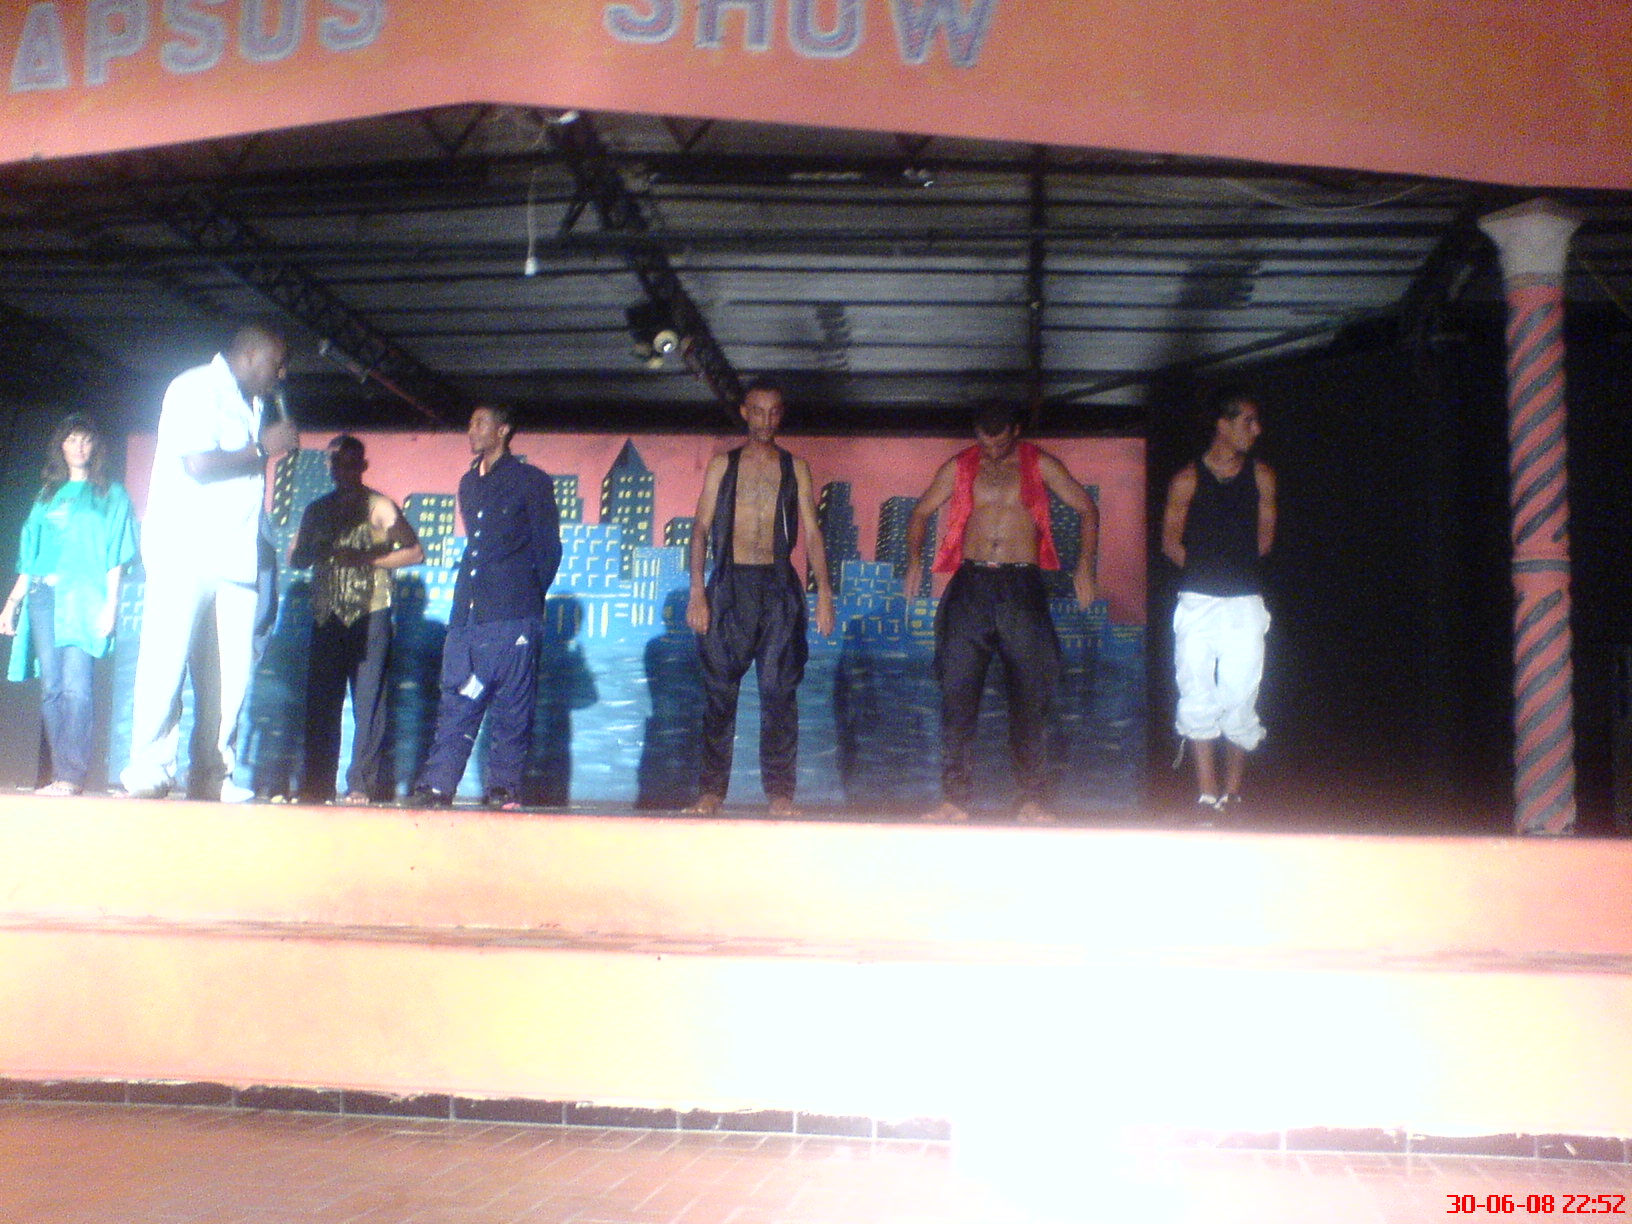 Thapsus show